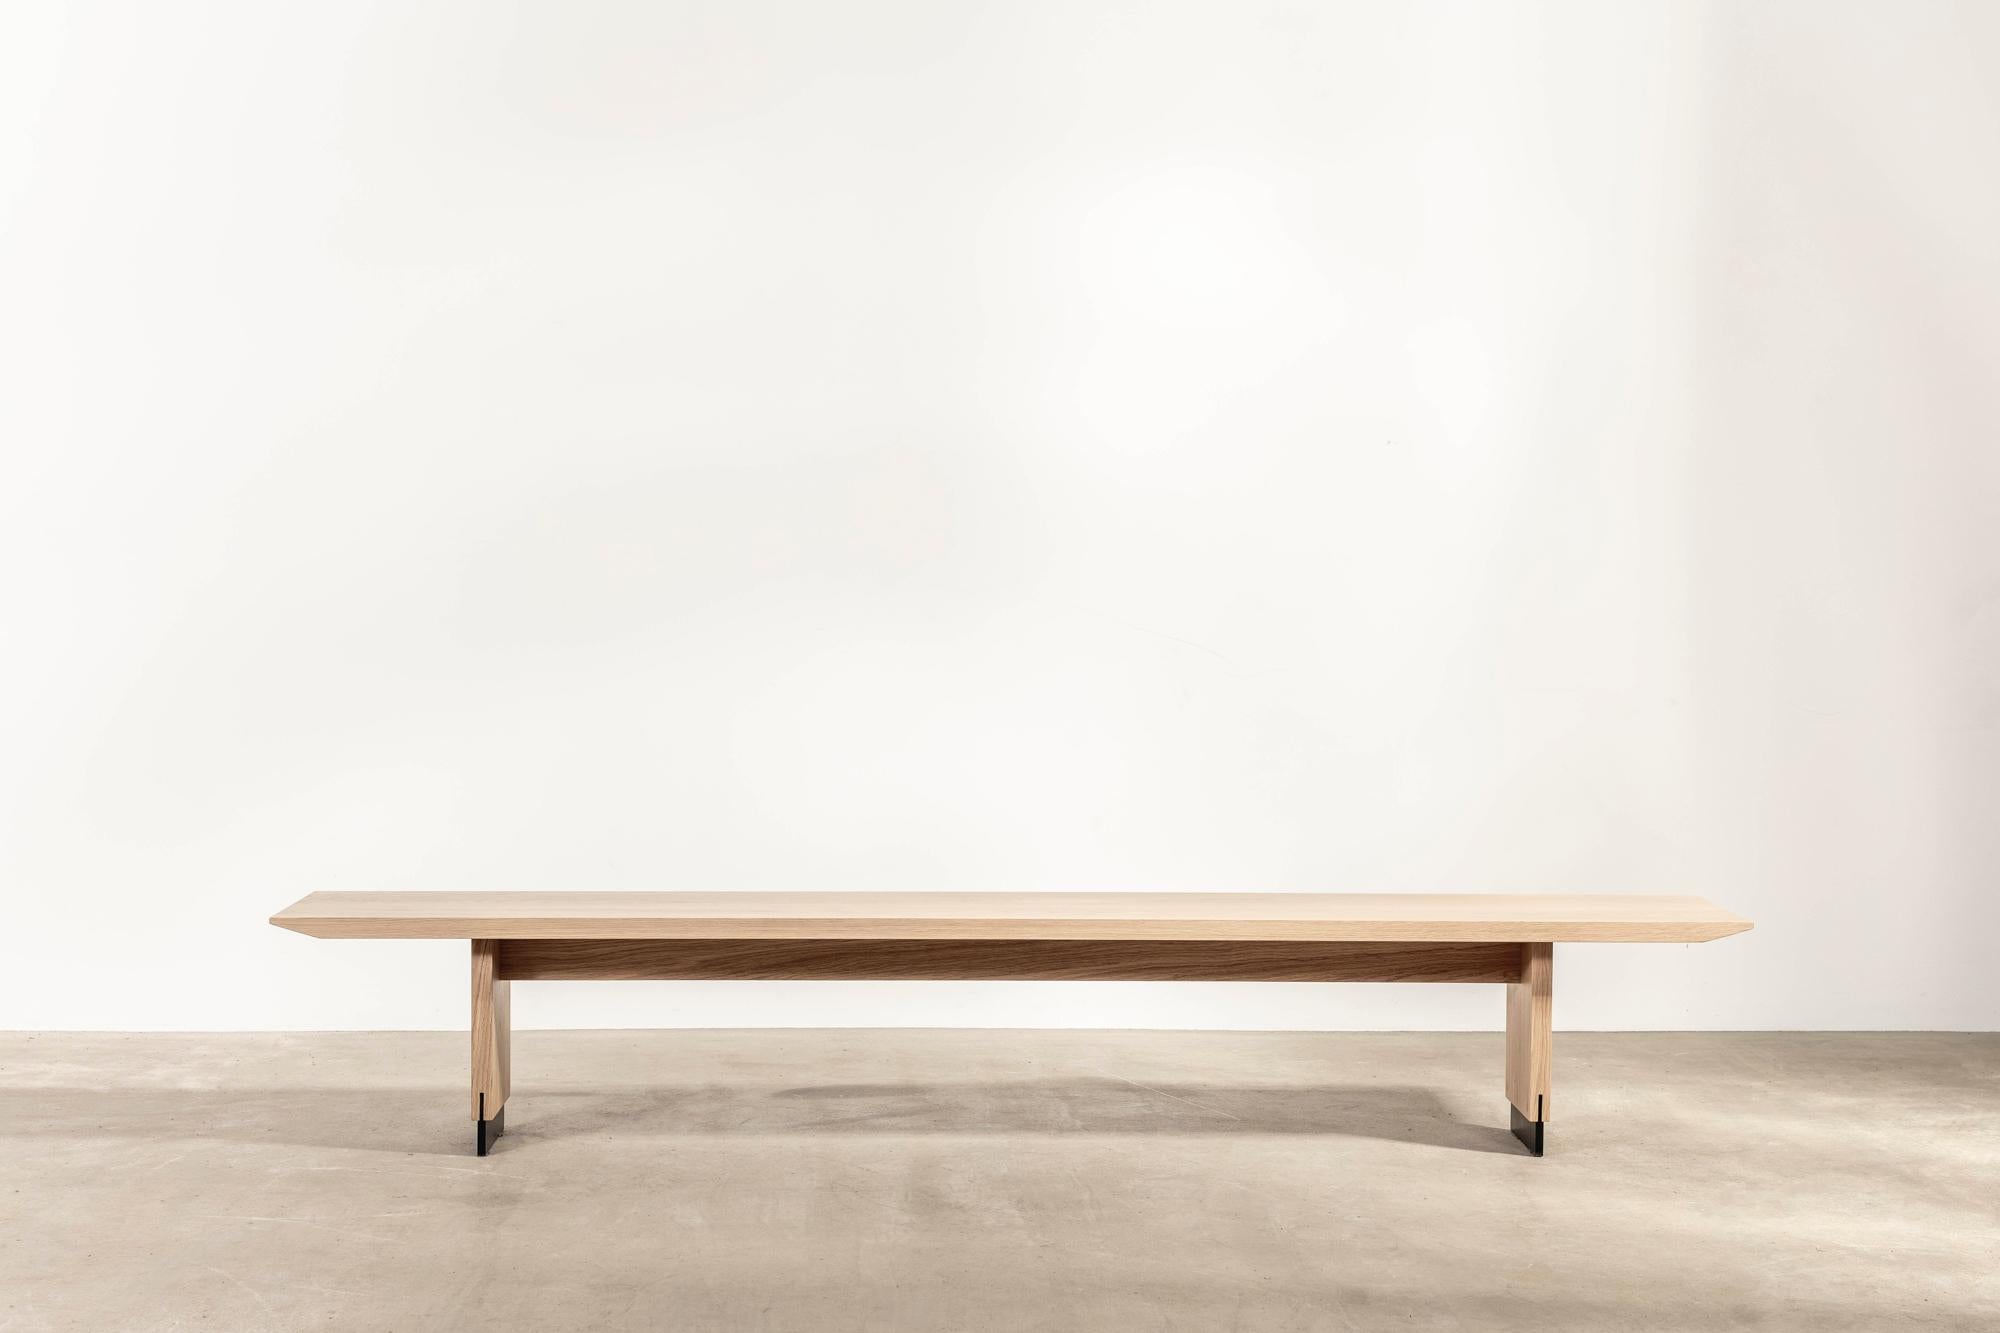 Designed and made for a revered Parisian boutique, the 'Otto' bench sits slightly low, with ample space for three people.

Its solid oak seat comes to a gentle taper at its edges, while inset patinated brass feet elegantly lift the piece.

The